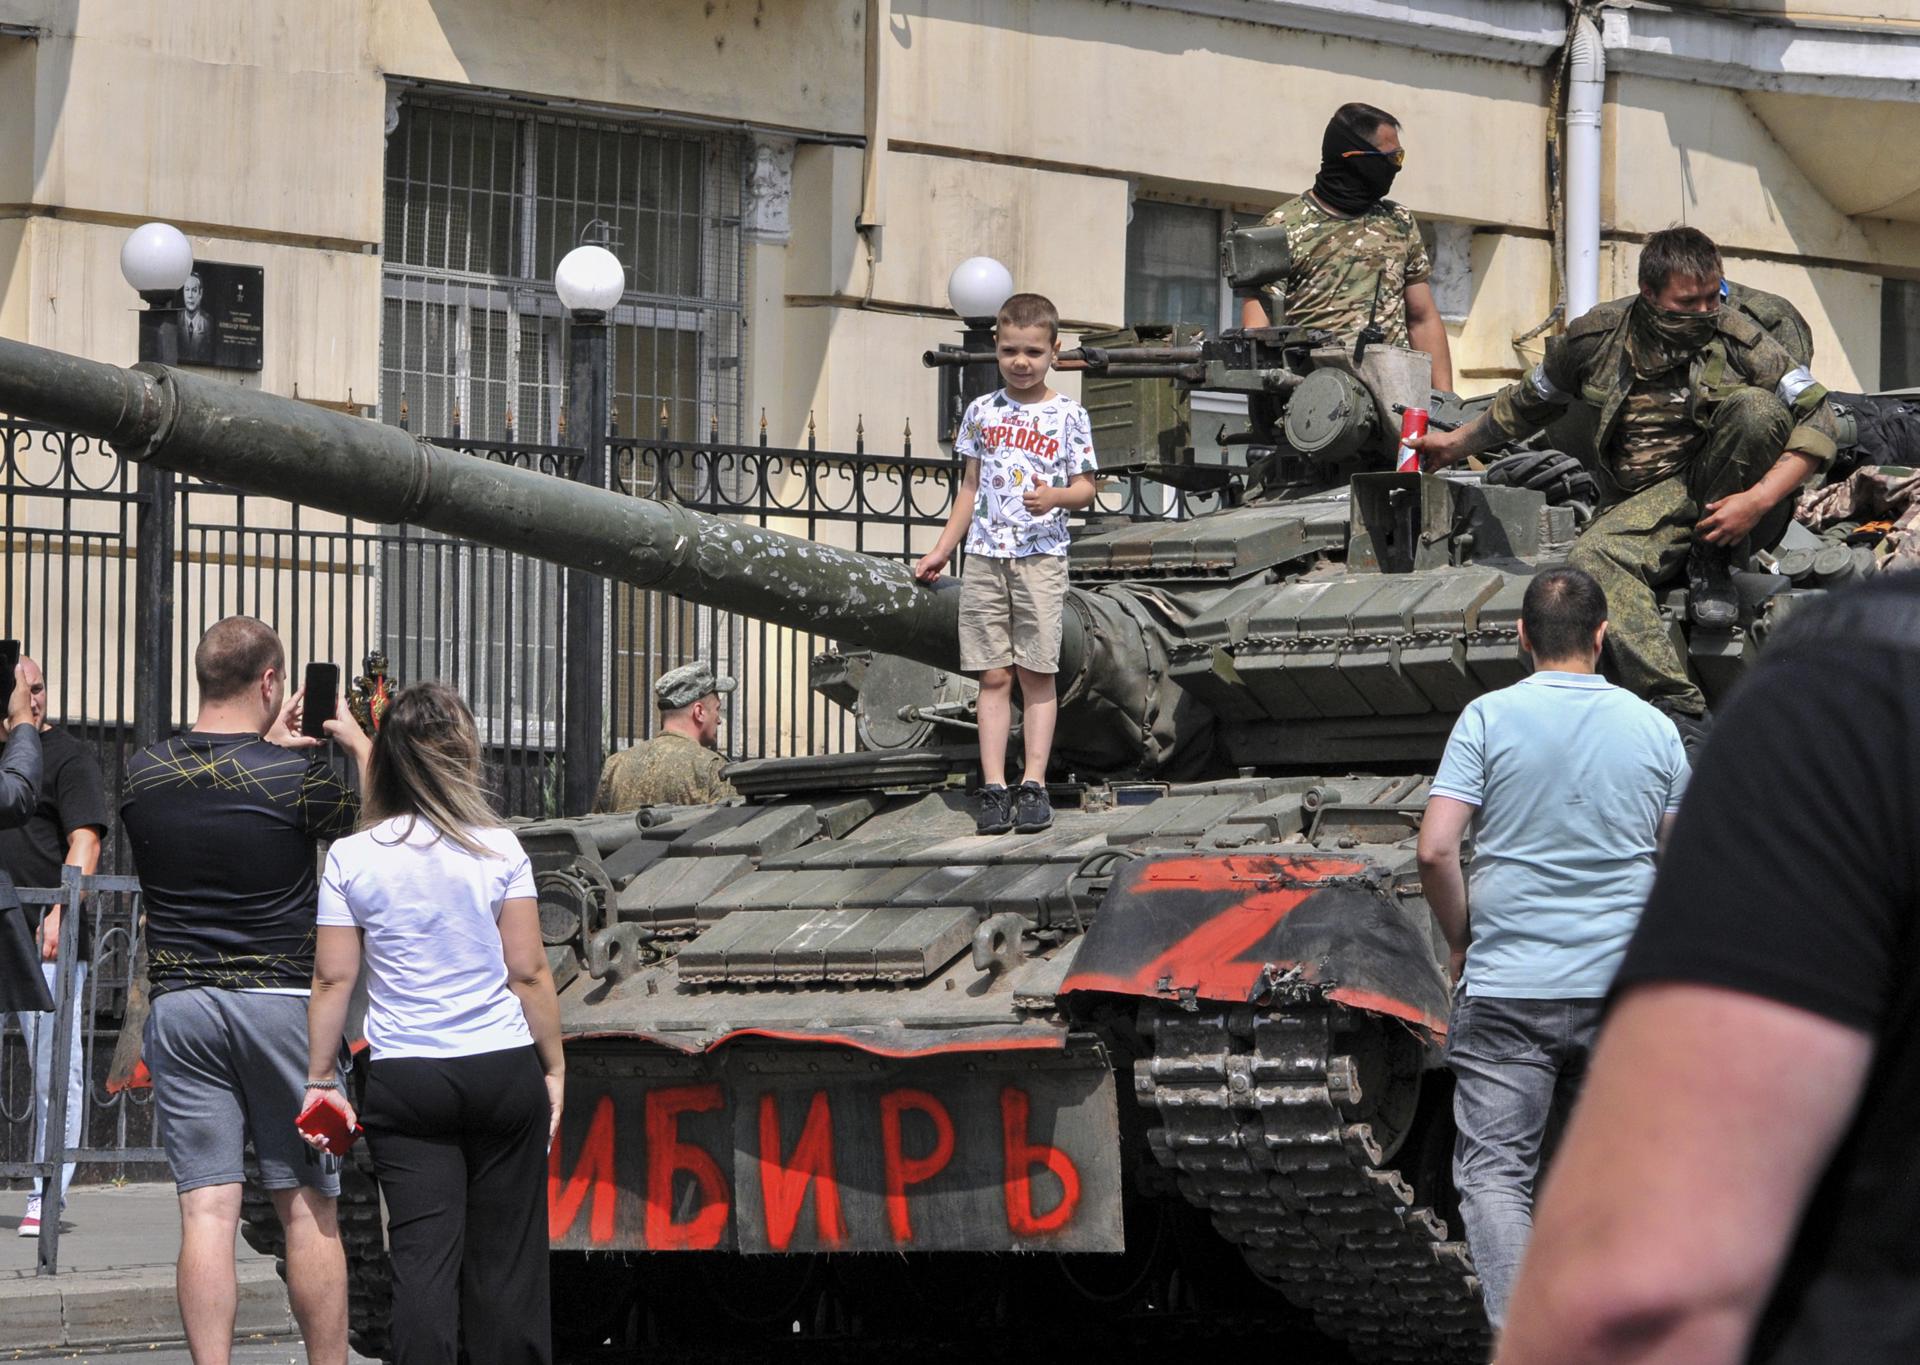 A child poses for a photo on a tank reading 'Siberia' as servicemen from private military company (PMC) Wagner Group block a street in downtown Rostov-on-Don, southern Russia, 24 June 2023. EFE-EPA/ARKADY BUDNITSKY
